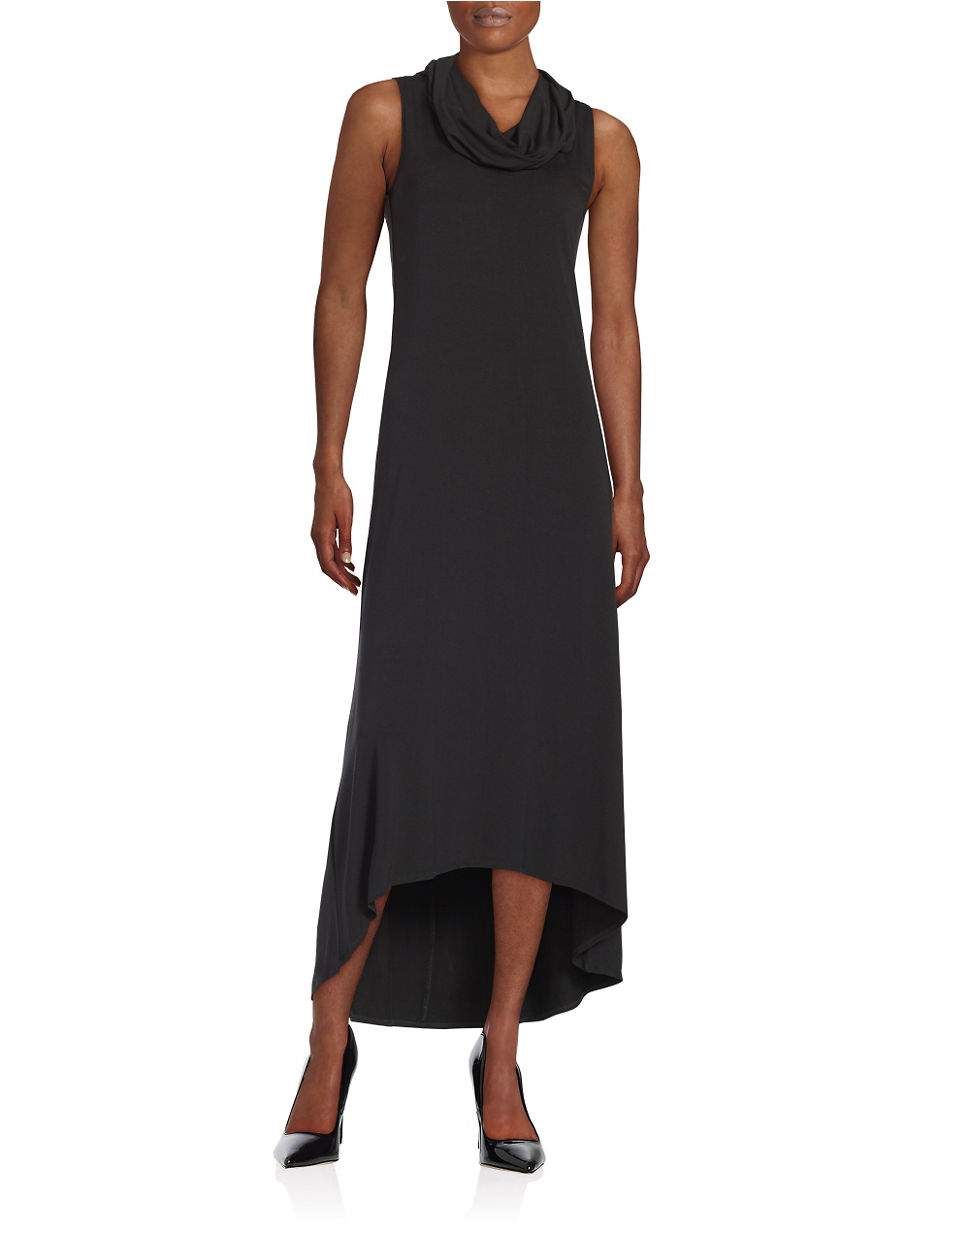 Istanbul lord and taylor black dresses